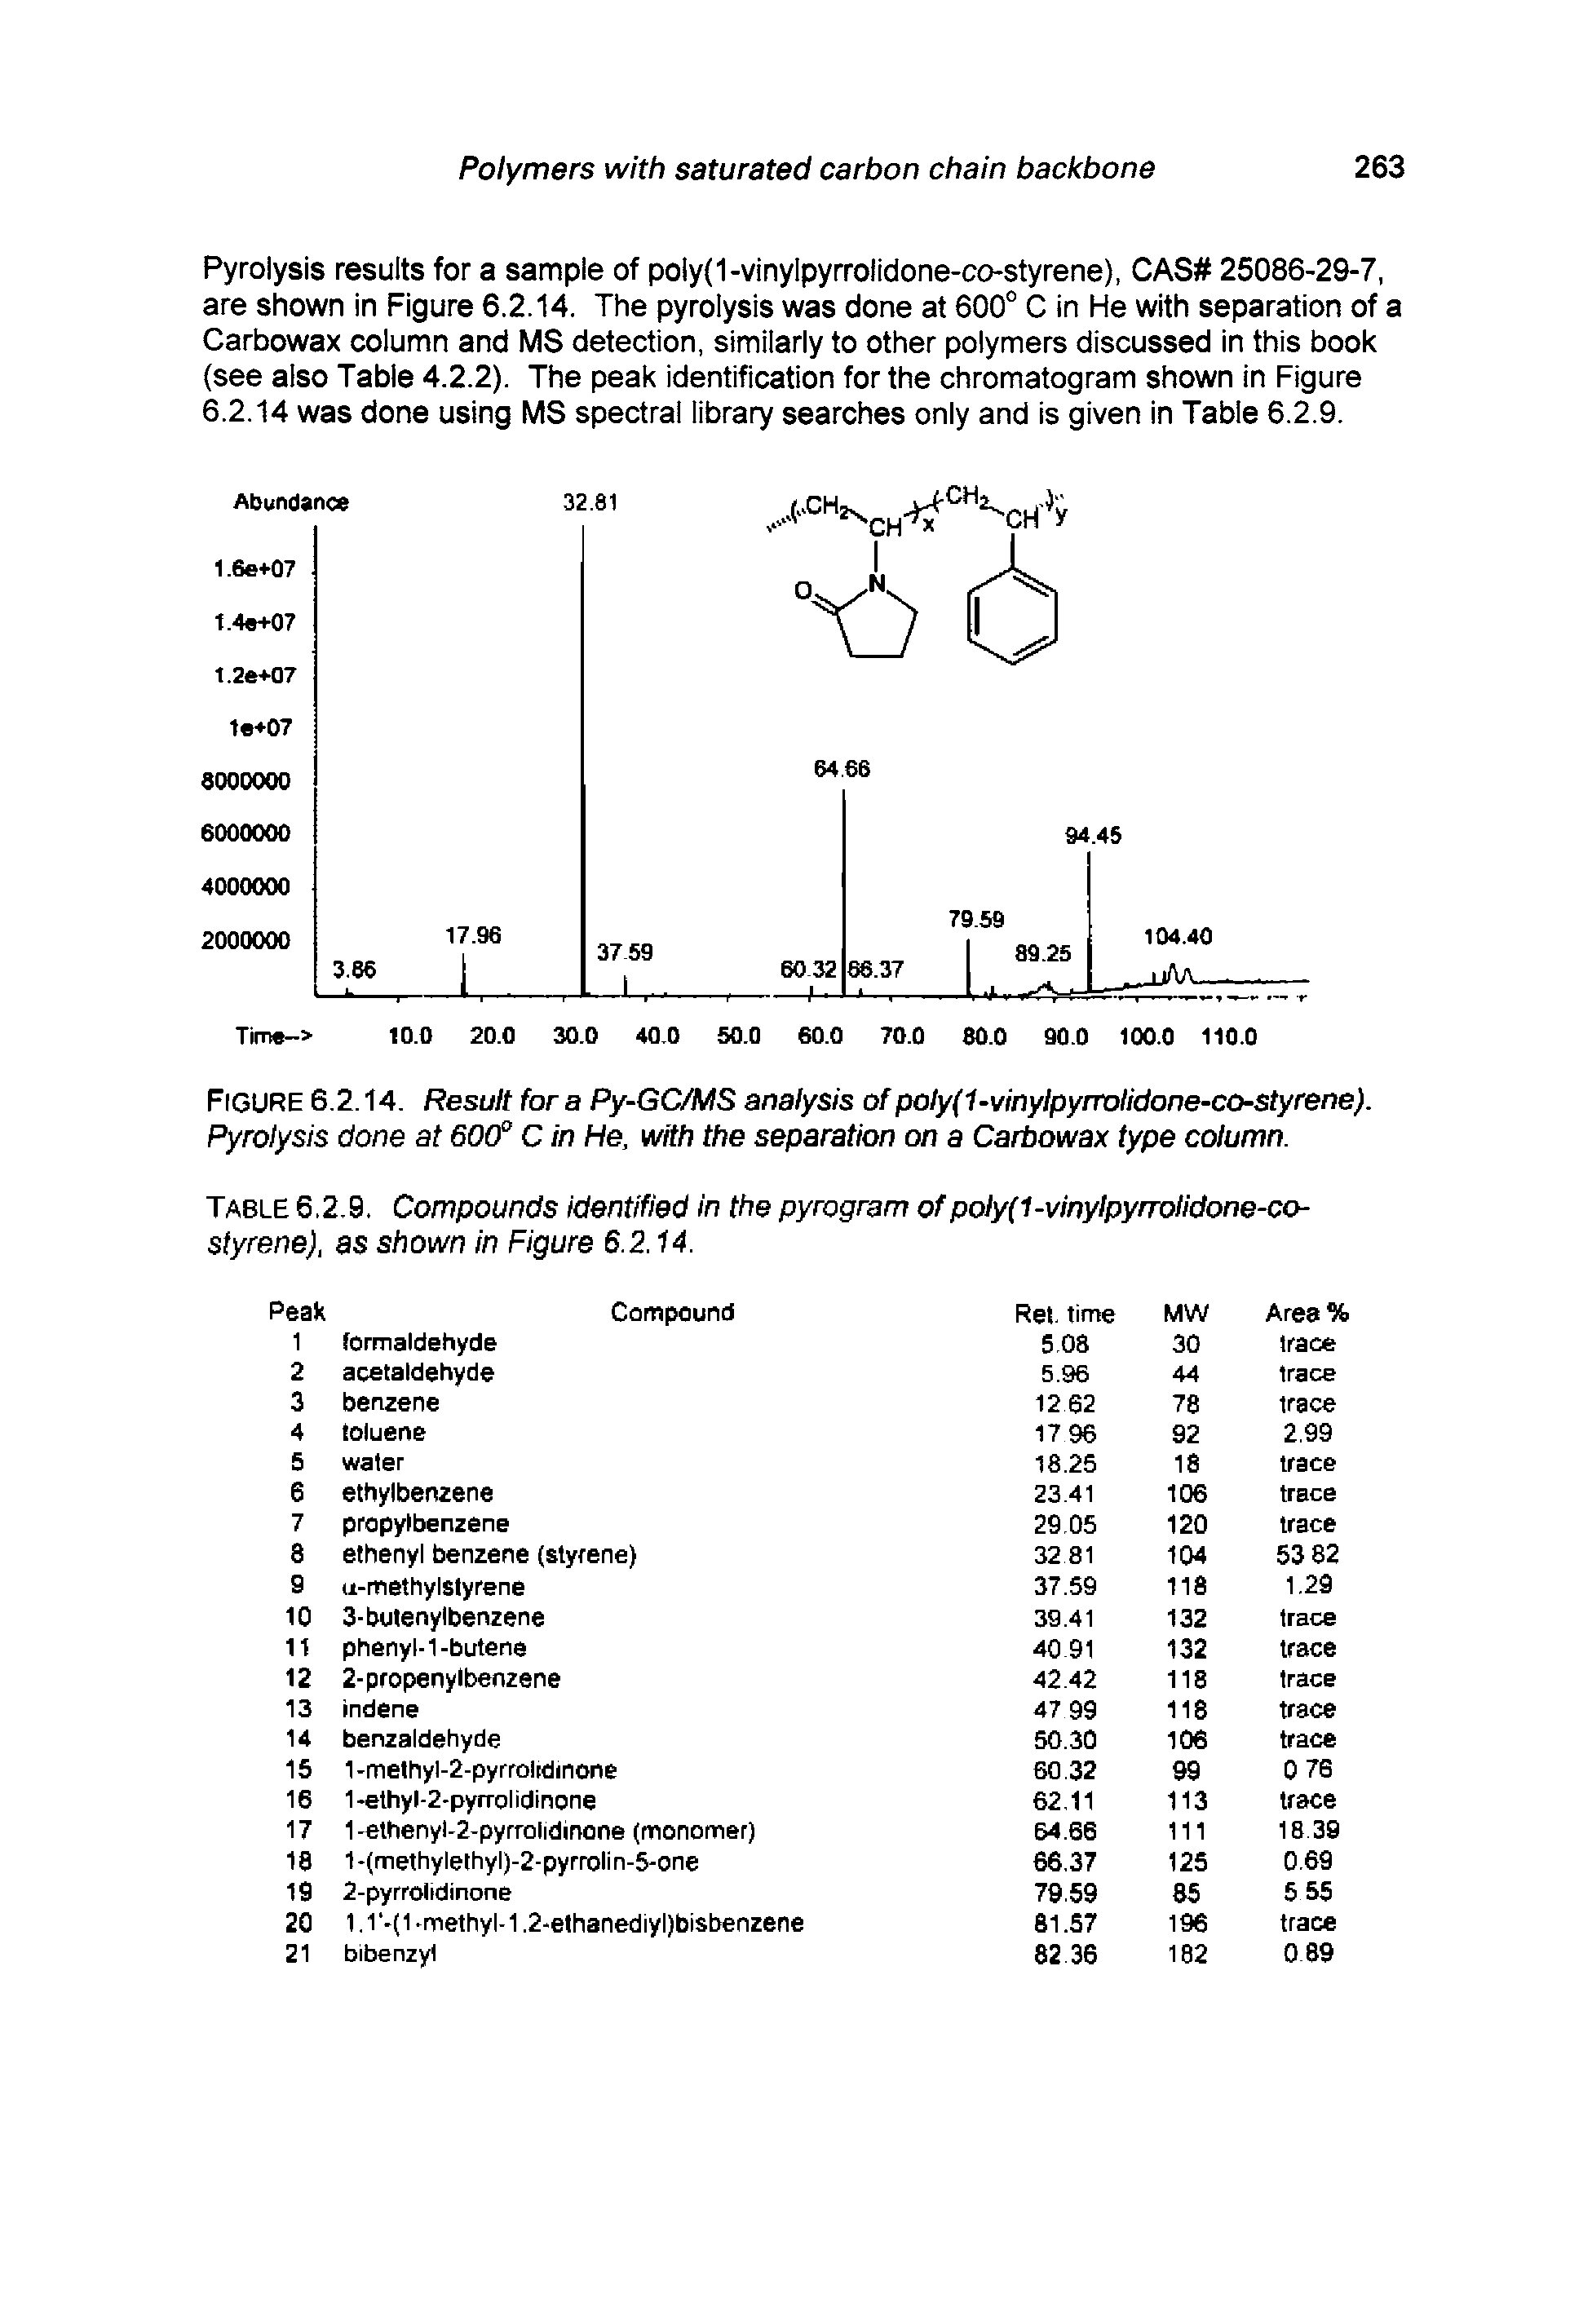 Table 6.2.9. Compounds identified in the pyrogram ofpoly(1-vinylpyrrolidone-co-styrene), as shown in Figure 6.2.14.